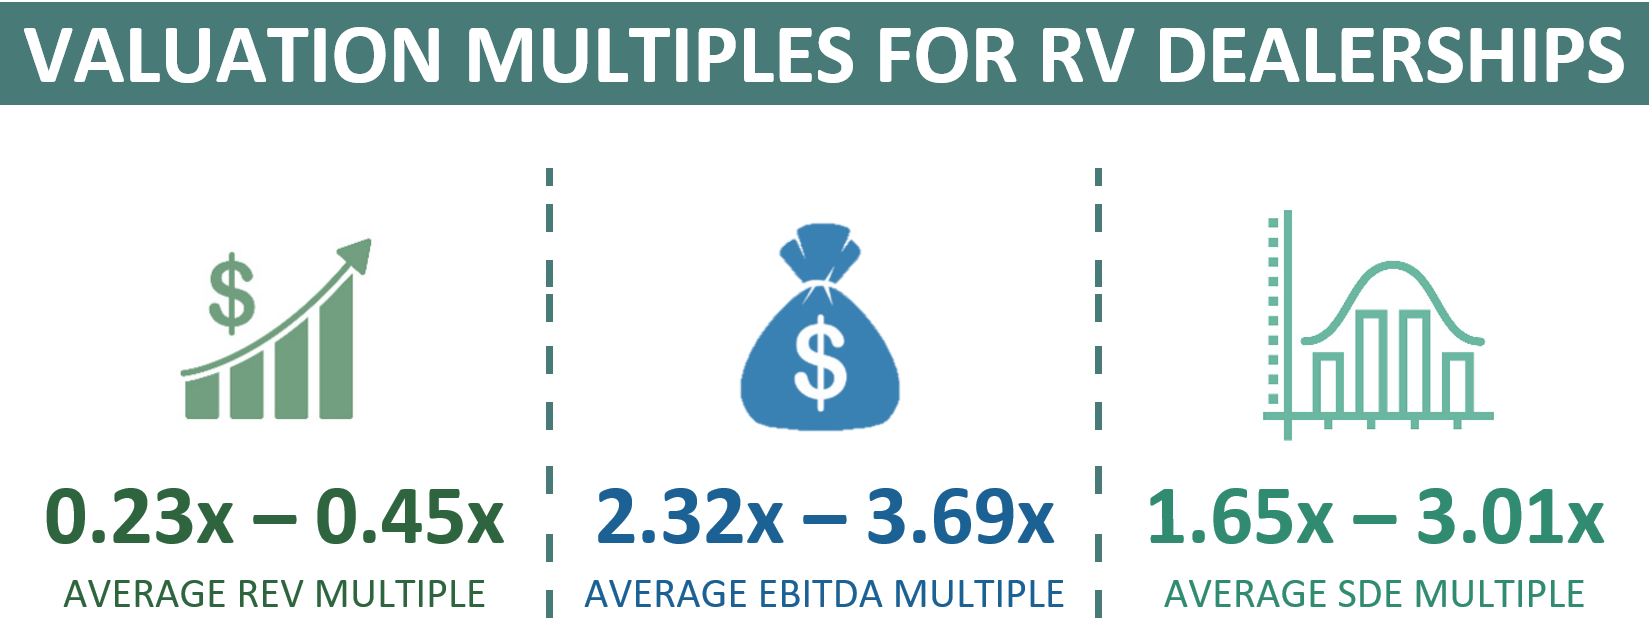 Valuation Multiples For an RV Dealership